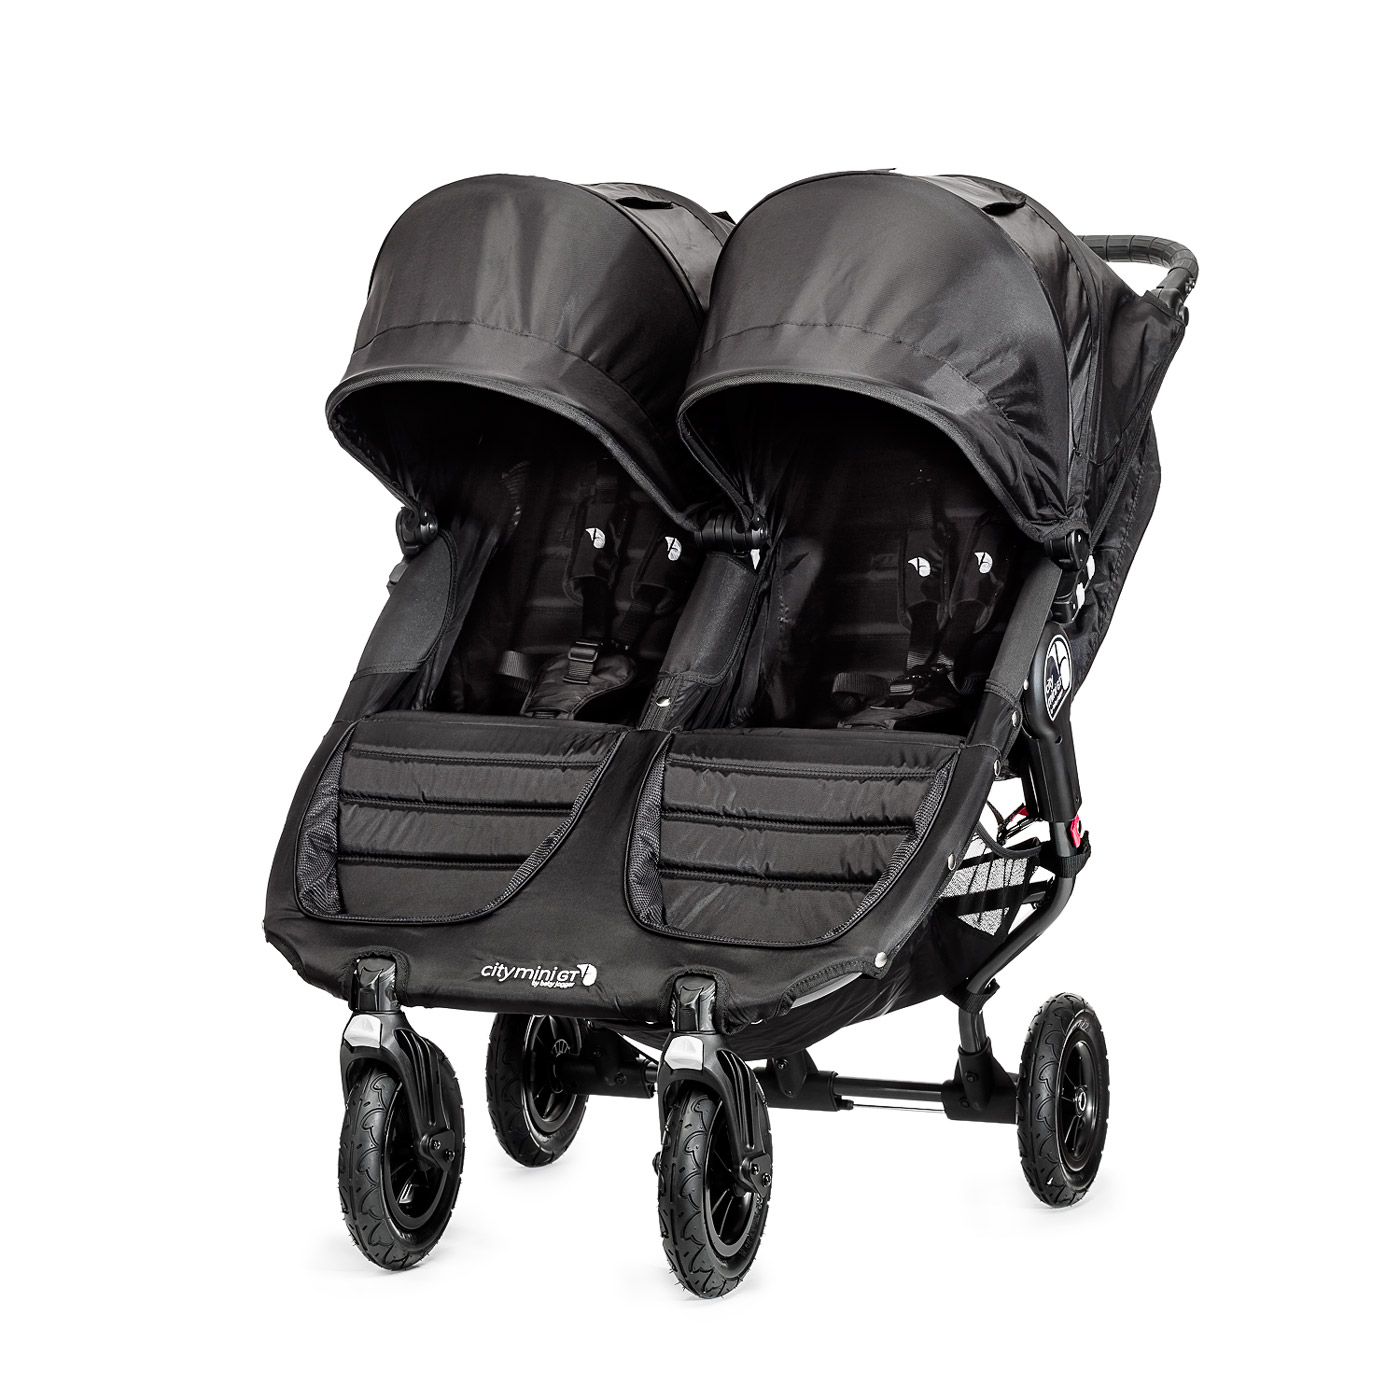 Baby Jogger City Mini GT Double stroller reviews, dimensions pushchair experts advise @Strollberry